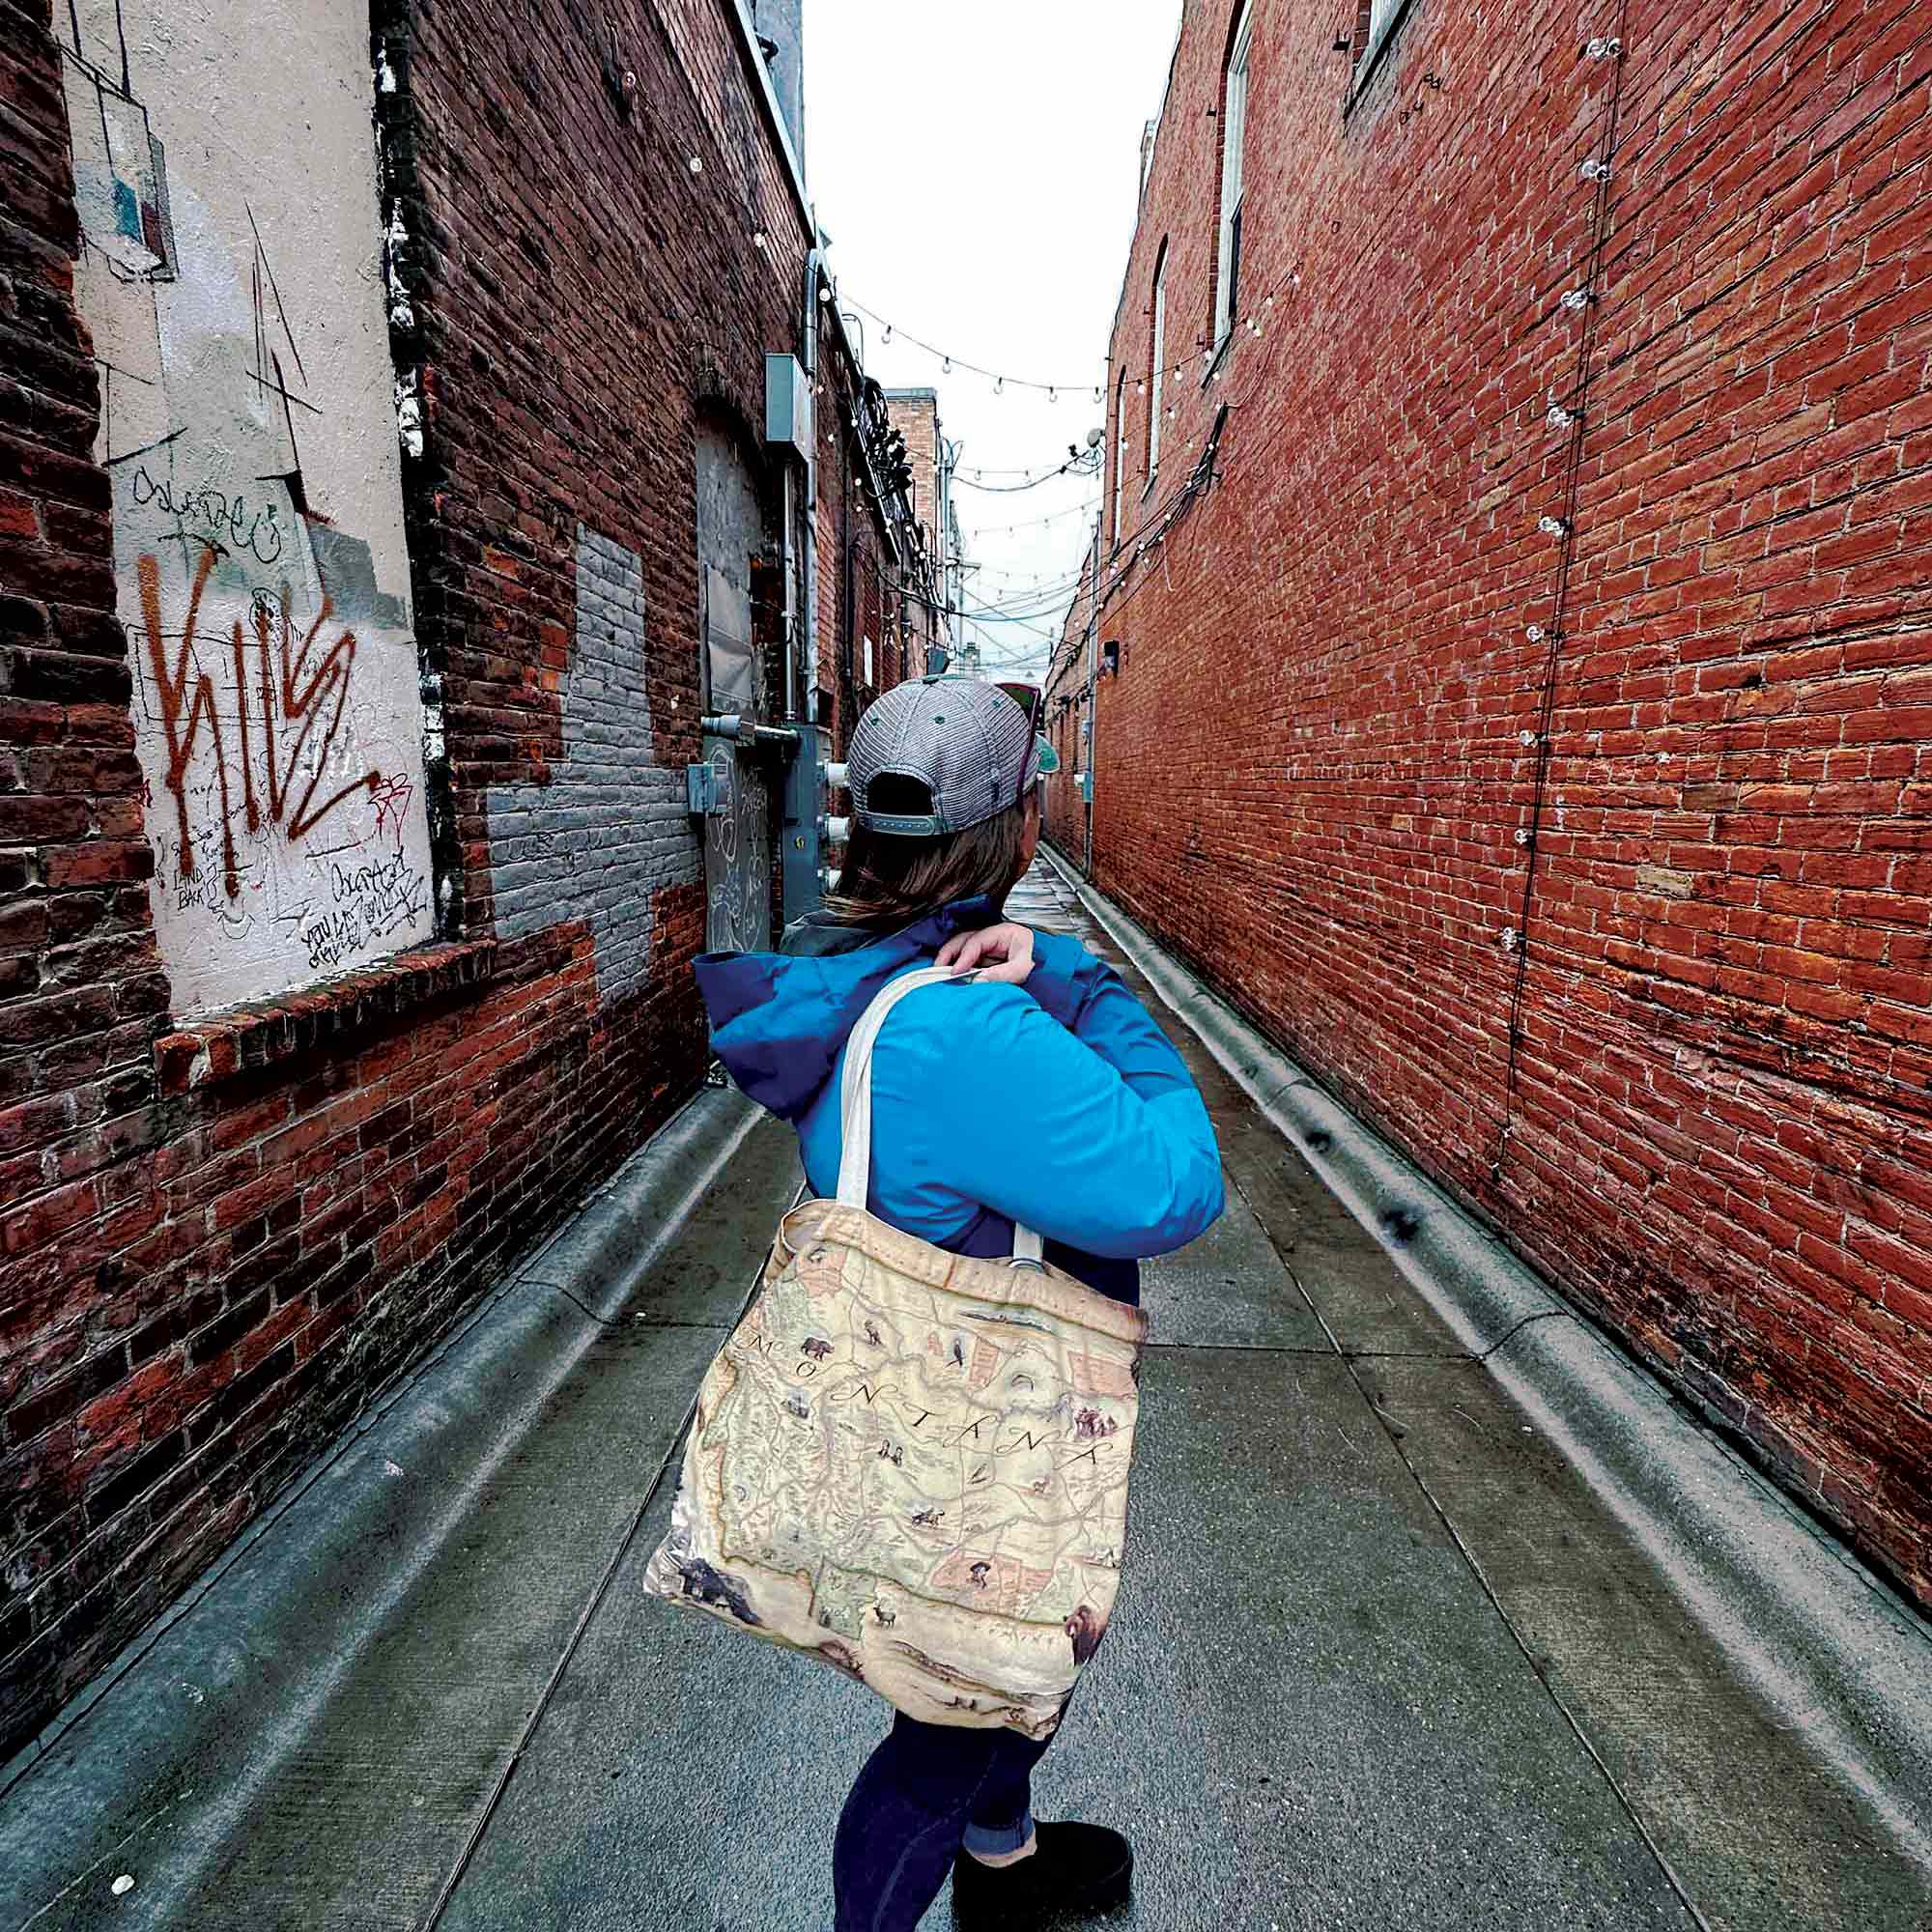 Women in an alley in Missoula, Montana carrying a Montana Canvas Tote Bag by Xplorer Maps. There is graffiti on the brick walls. 